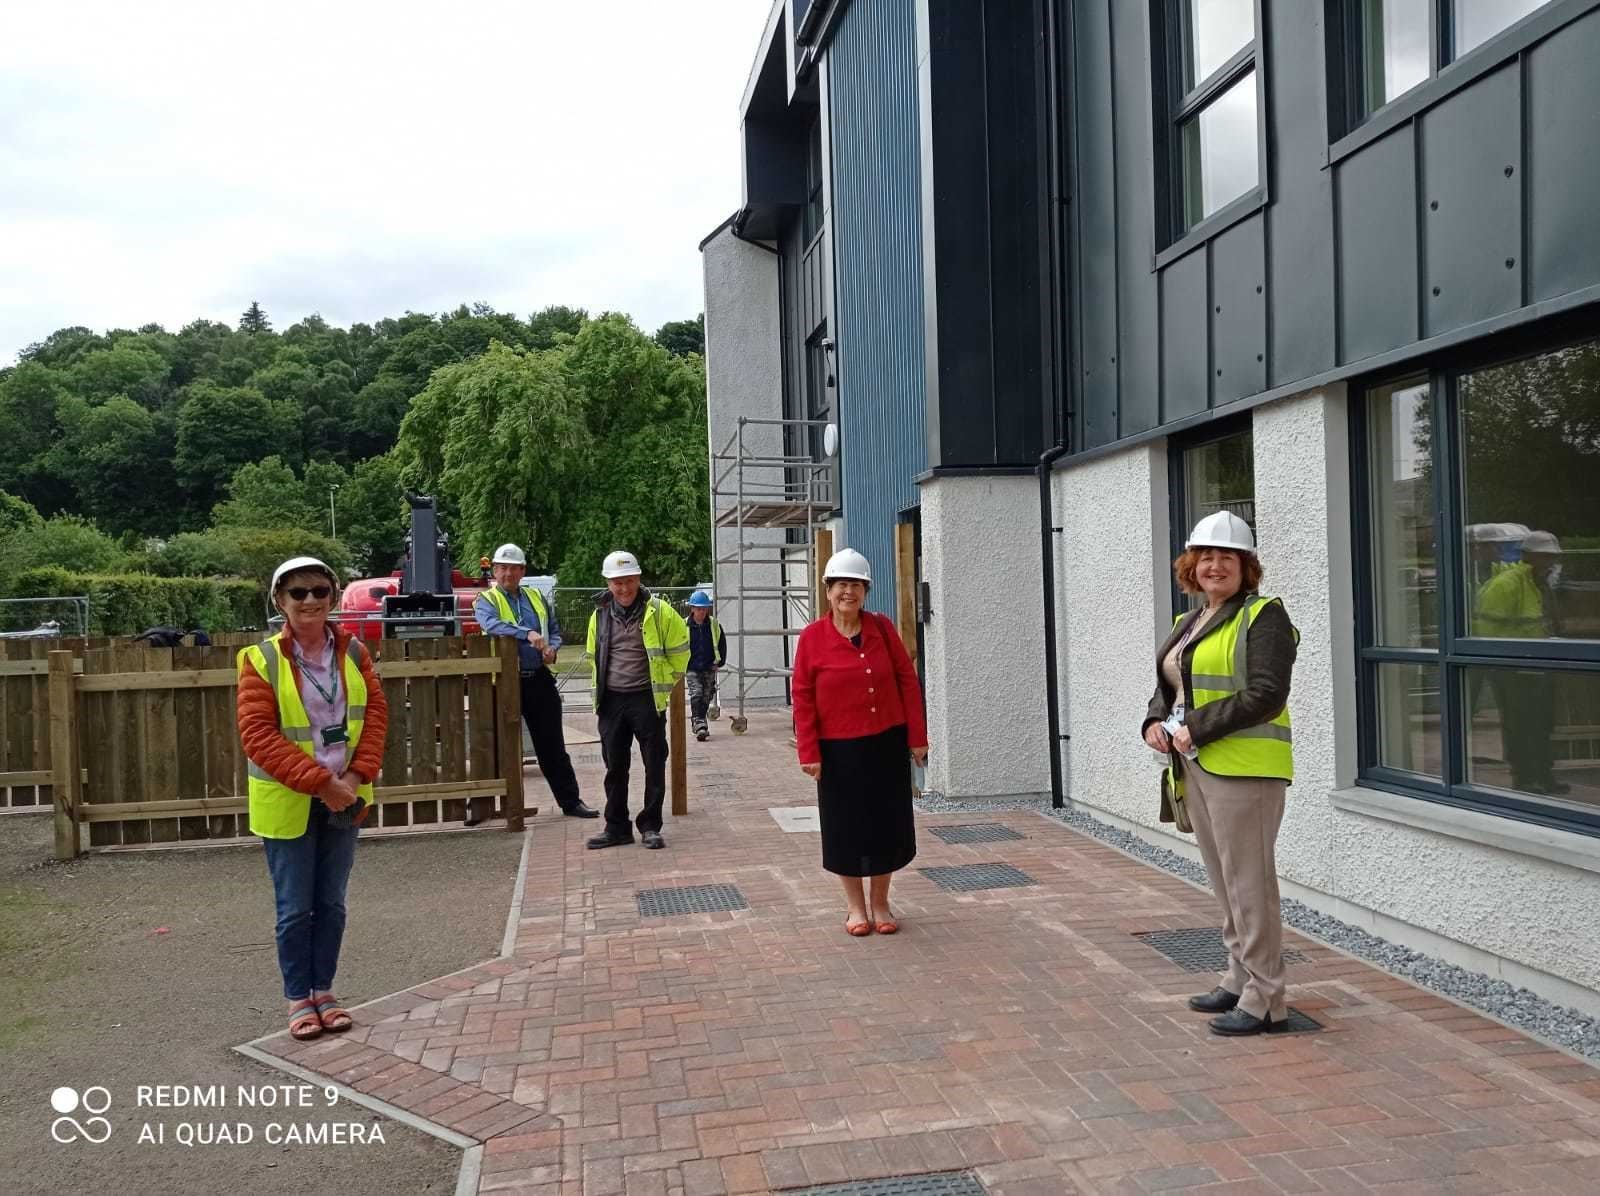 Councillor Margaret Paterson (centre) and Cllr Angela Maclean (right) view the newly completed homes at Joe Yates Court in Dingwall.